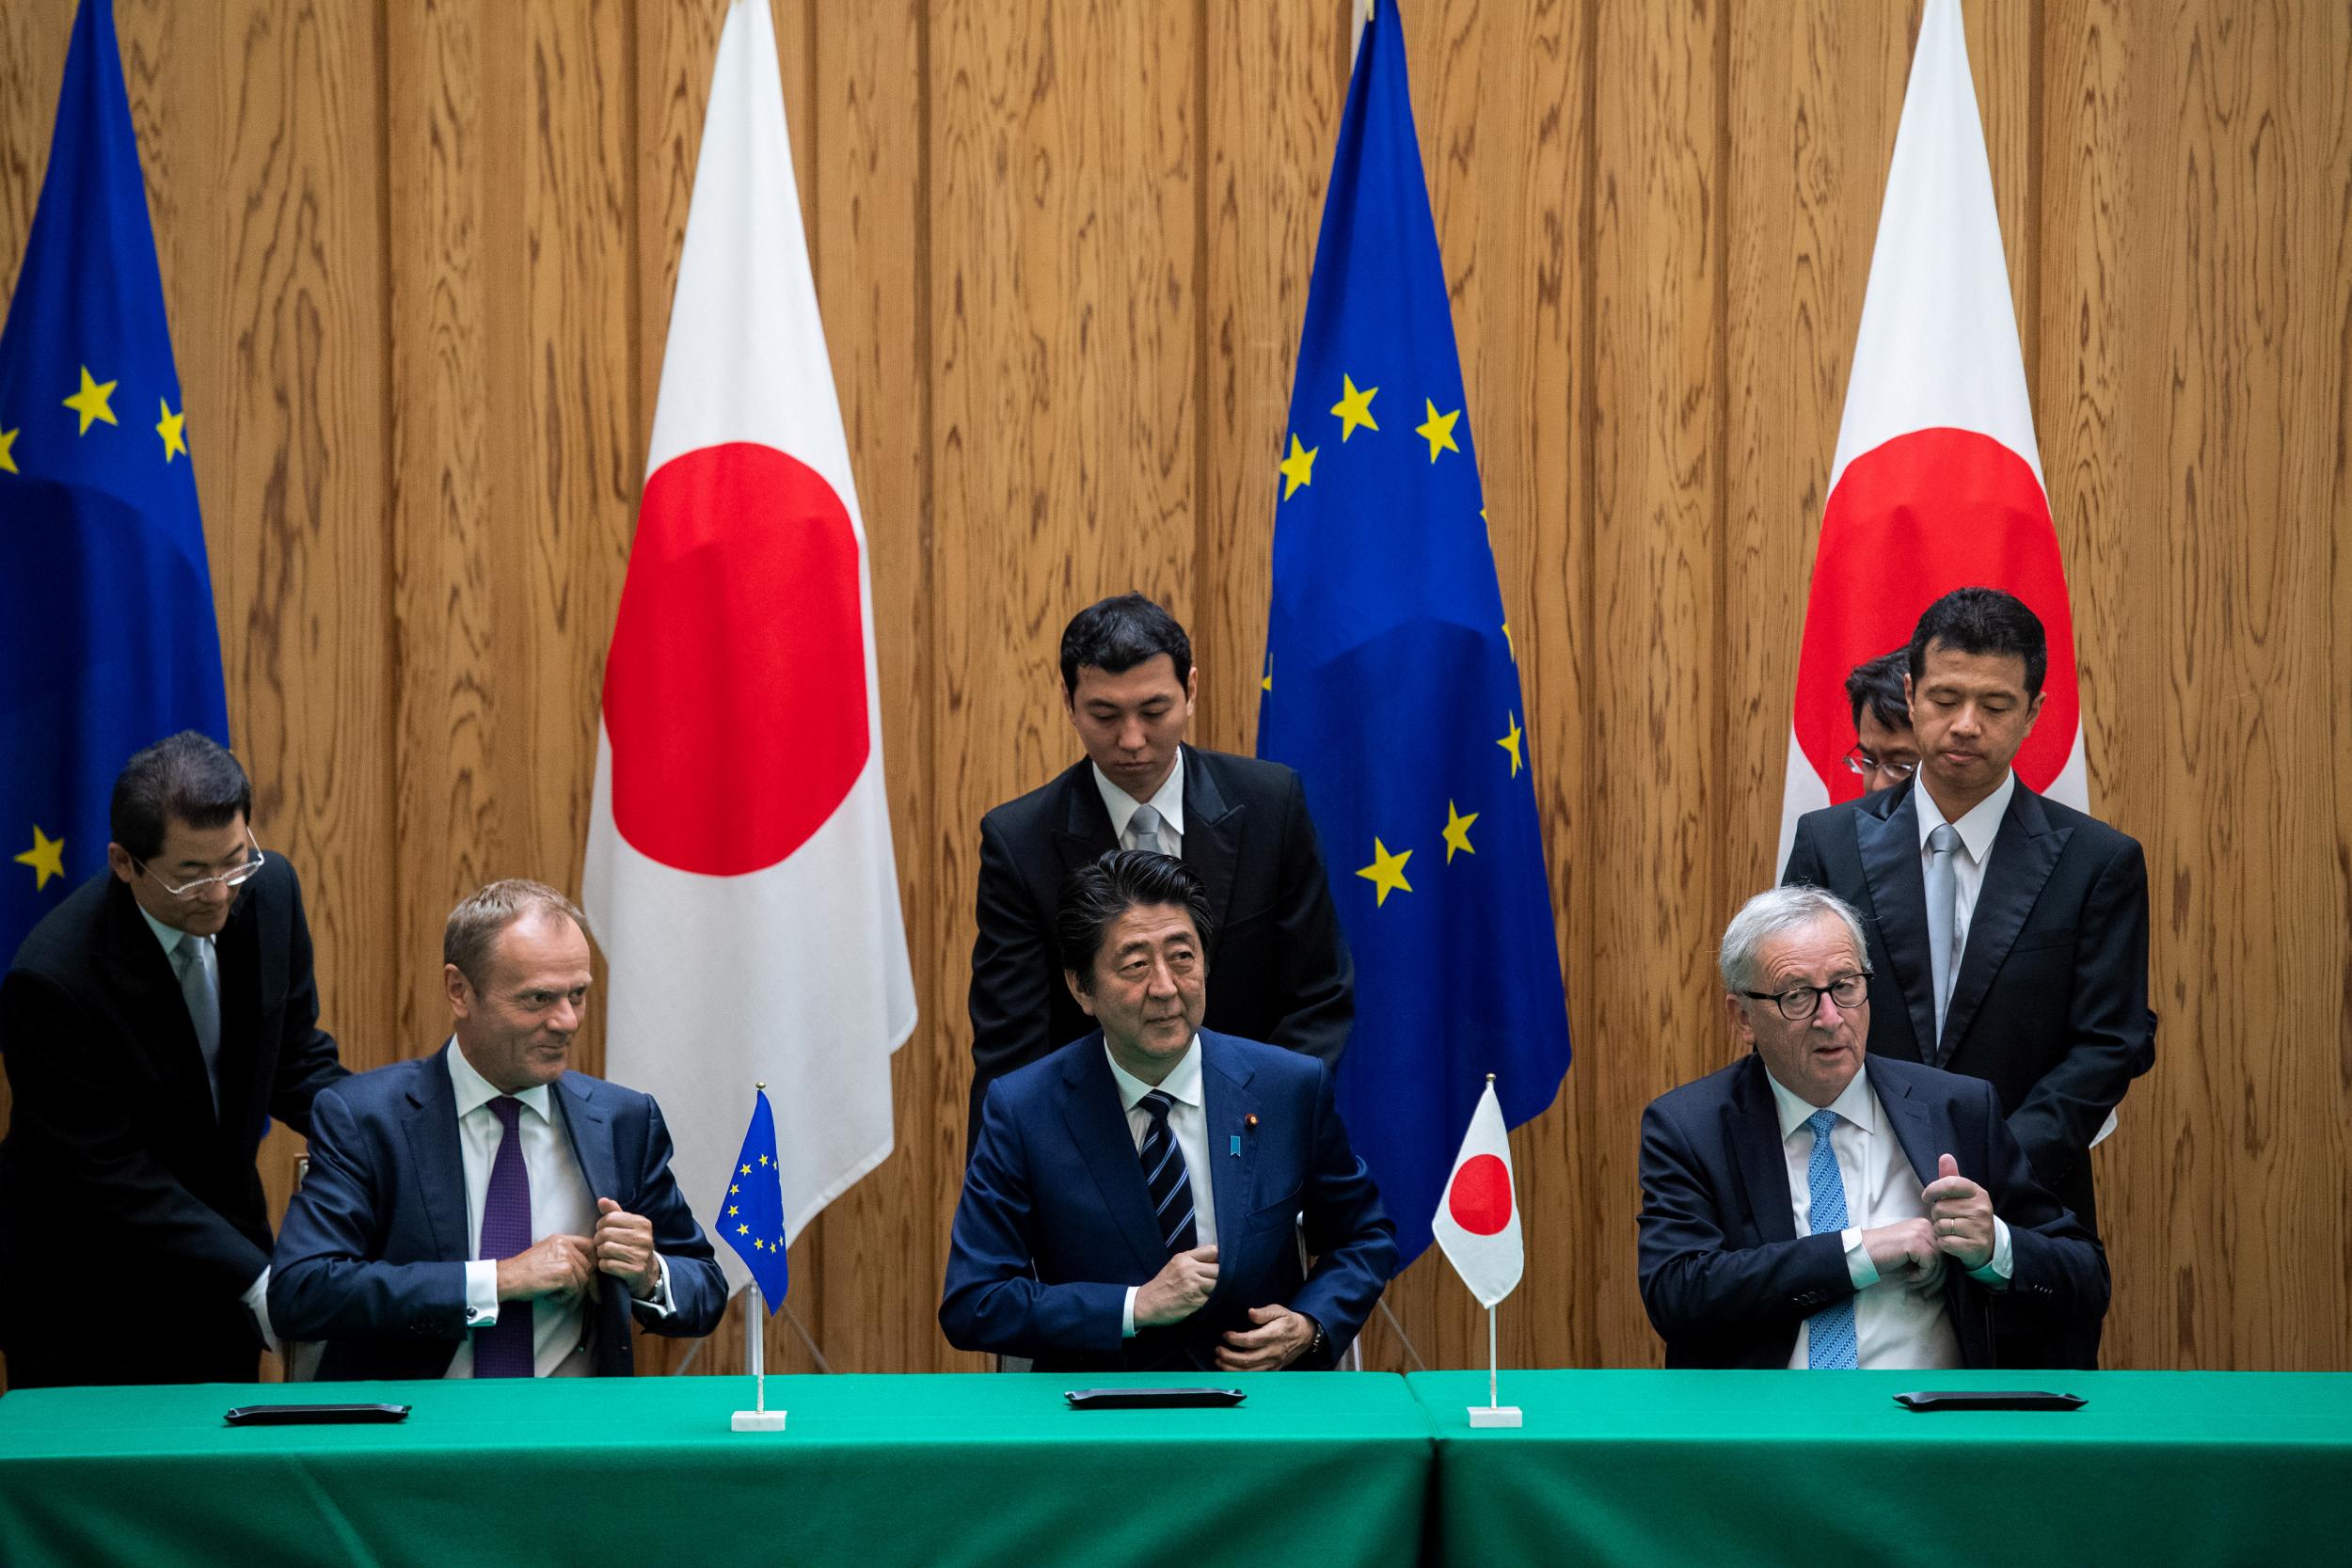 The ceremonial signing of the deal took place in Tokyo on Tuesday